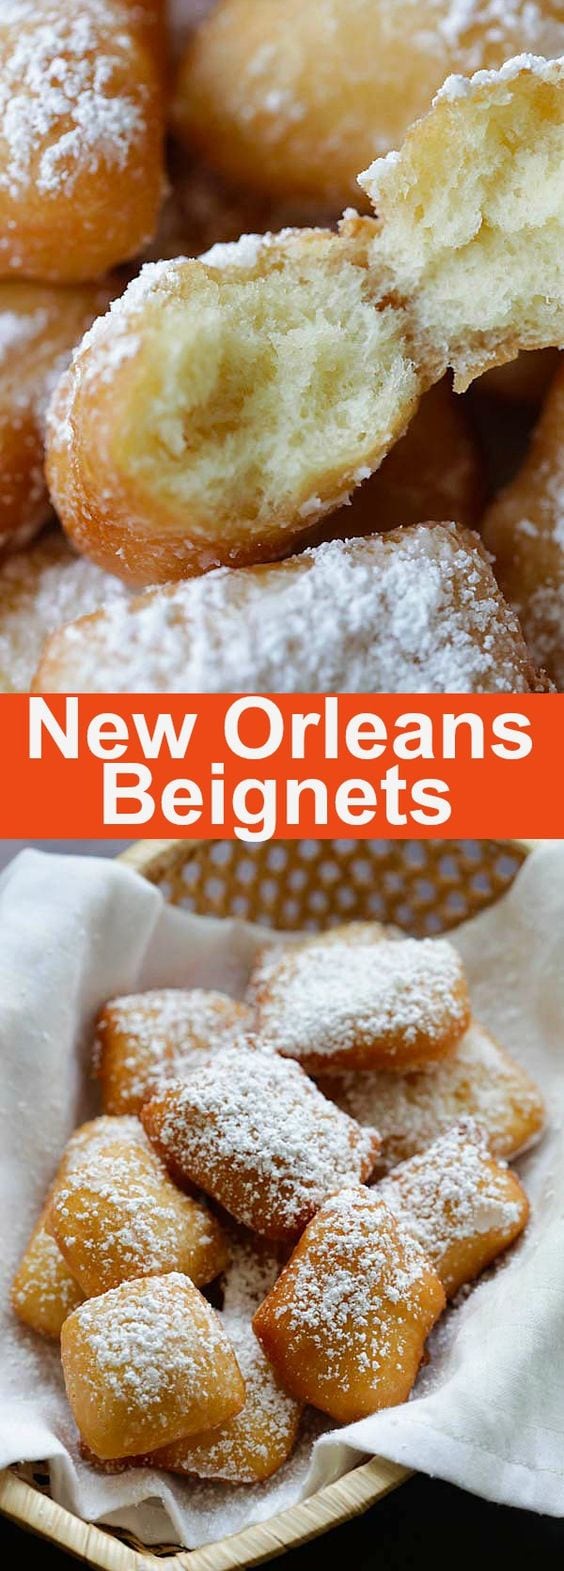 New Orleans Beignets - soft, pillowy and the best New Orleans beignets recipe ever. This recipe is fail-proof, anyone can make it | rasamalaysia.com